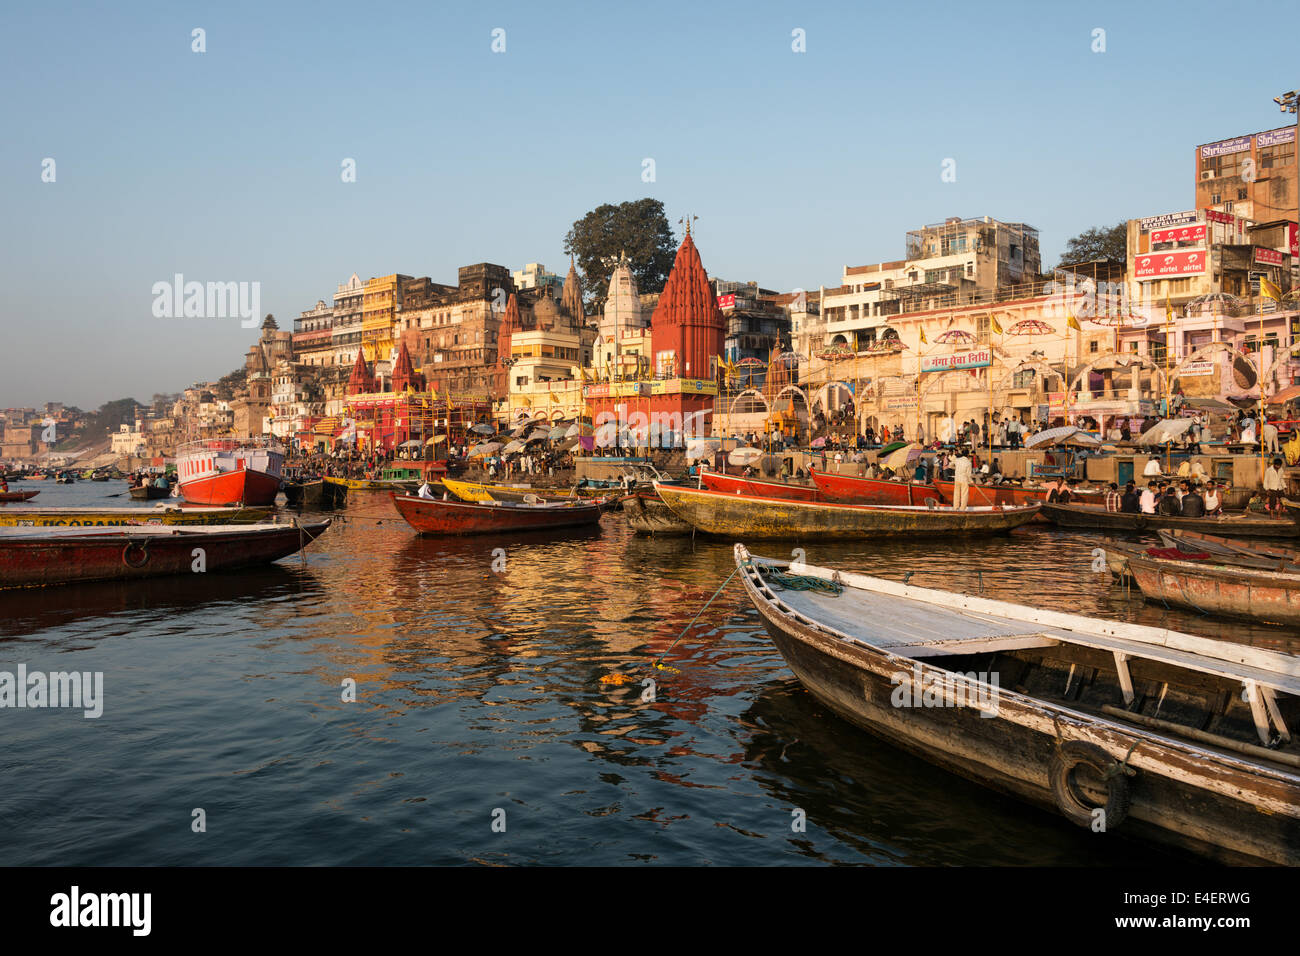 Ghats of ancient city of Varanasi seen from the holy river Ganges. Stock Photo